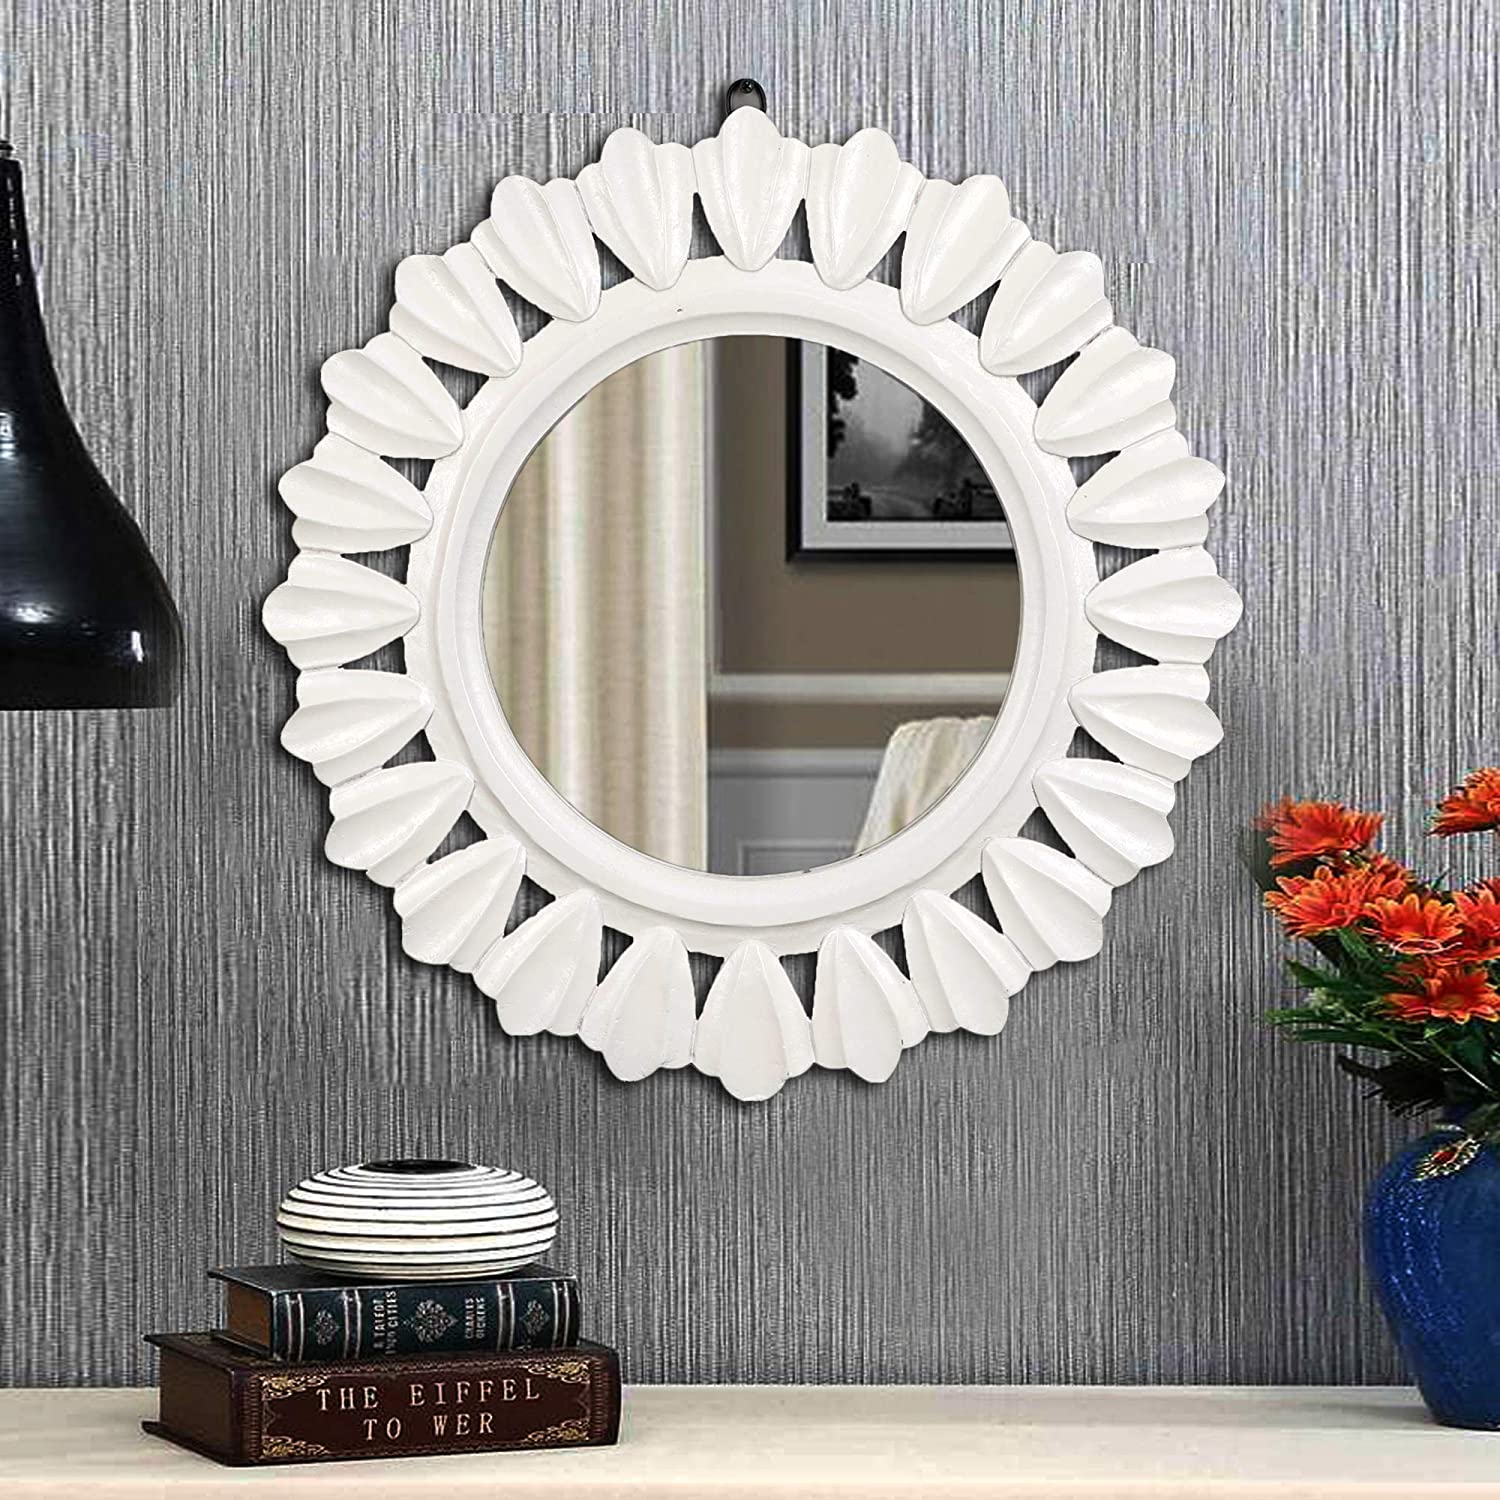 Decorative and Hand Crafted Wooden Wall Mirror in Duco White Finish - 20” x 20"